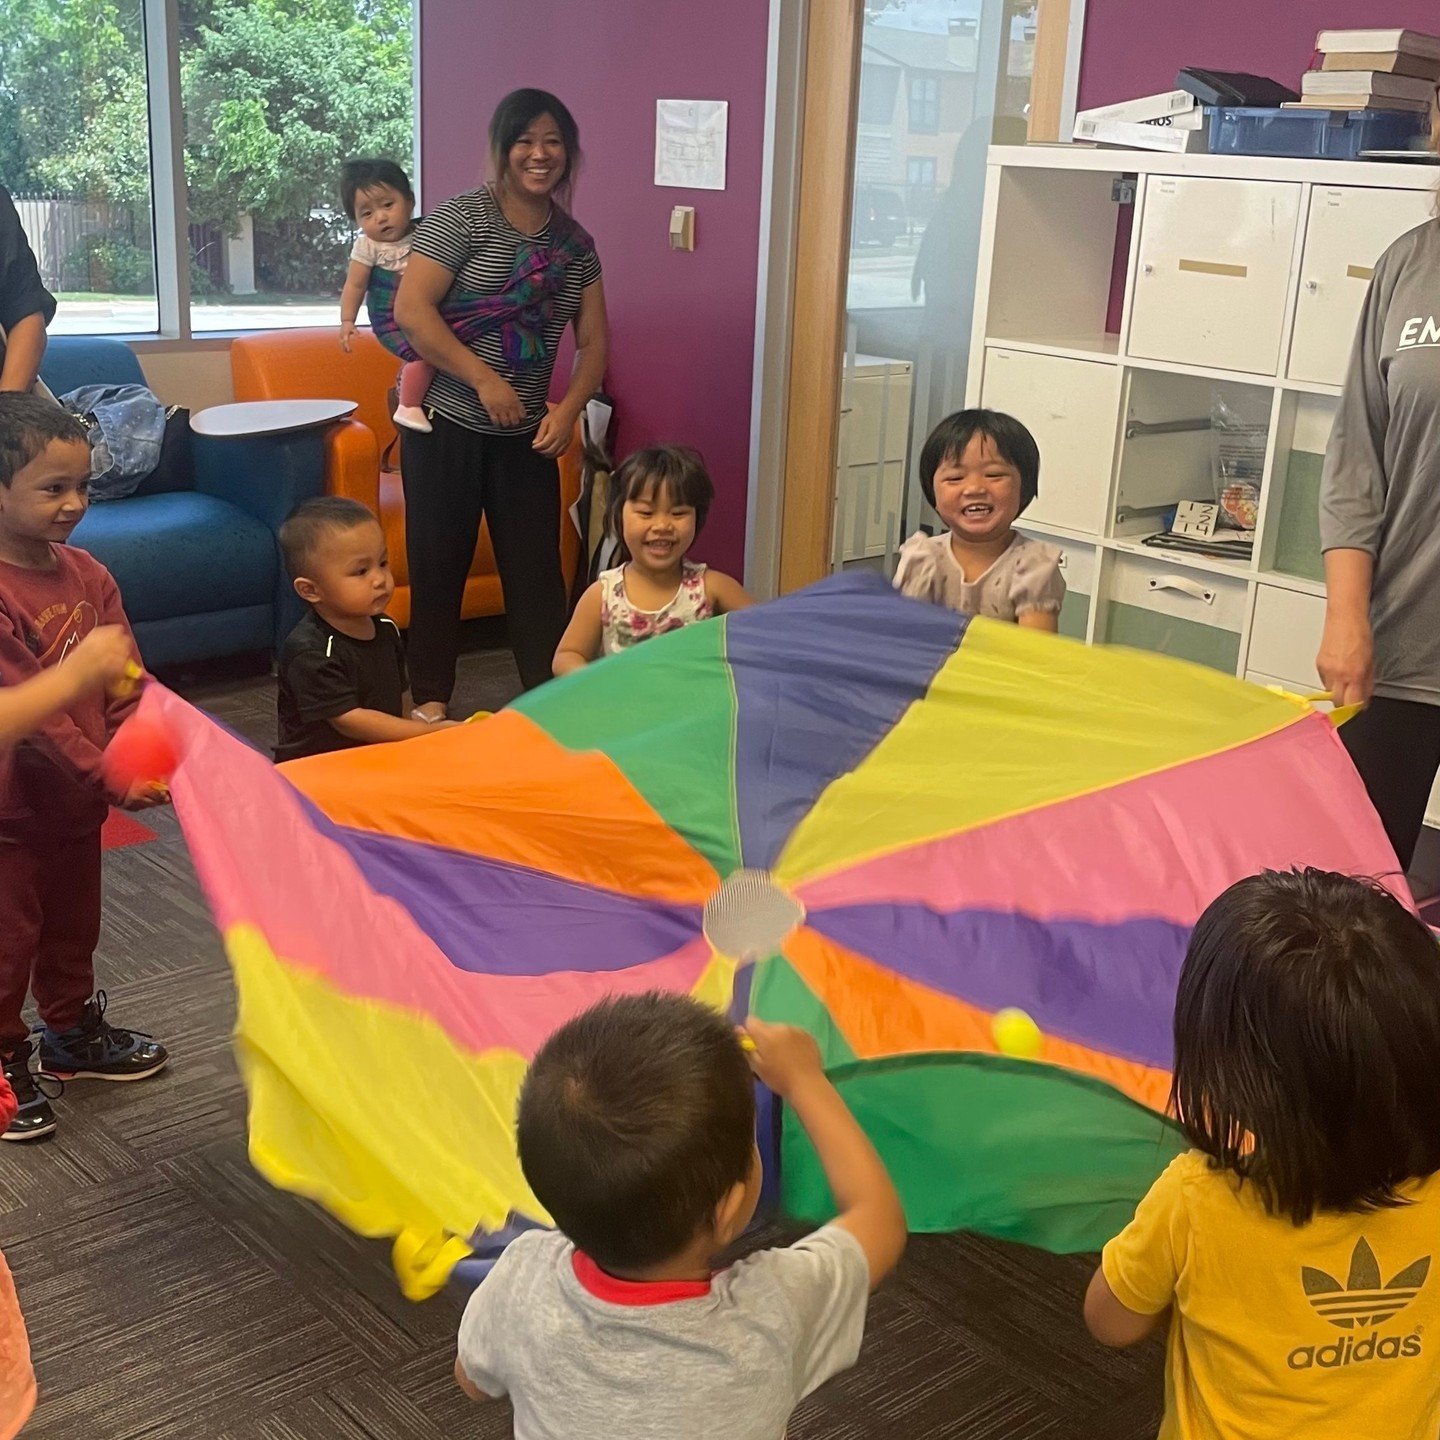 Everyone&rsquo;s favorite part of gym class as a child, definitely the parachute! We love learning and having tons of fun with our preschoolers! They are full of joy and smiles and remind us to not take life too seriously! 🥰

Have a great weekend!